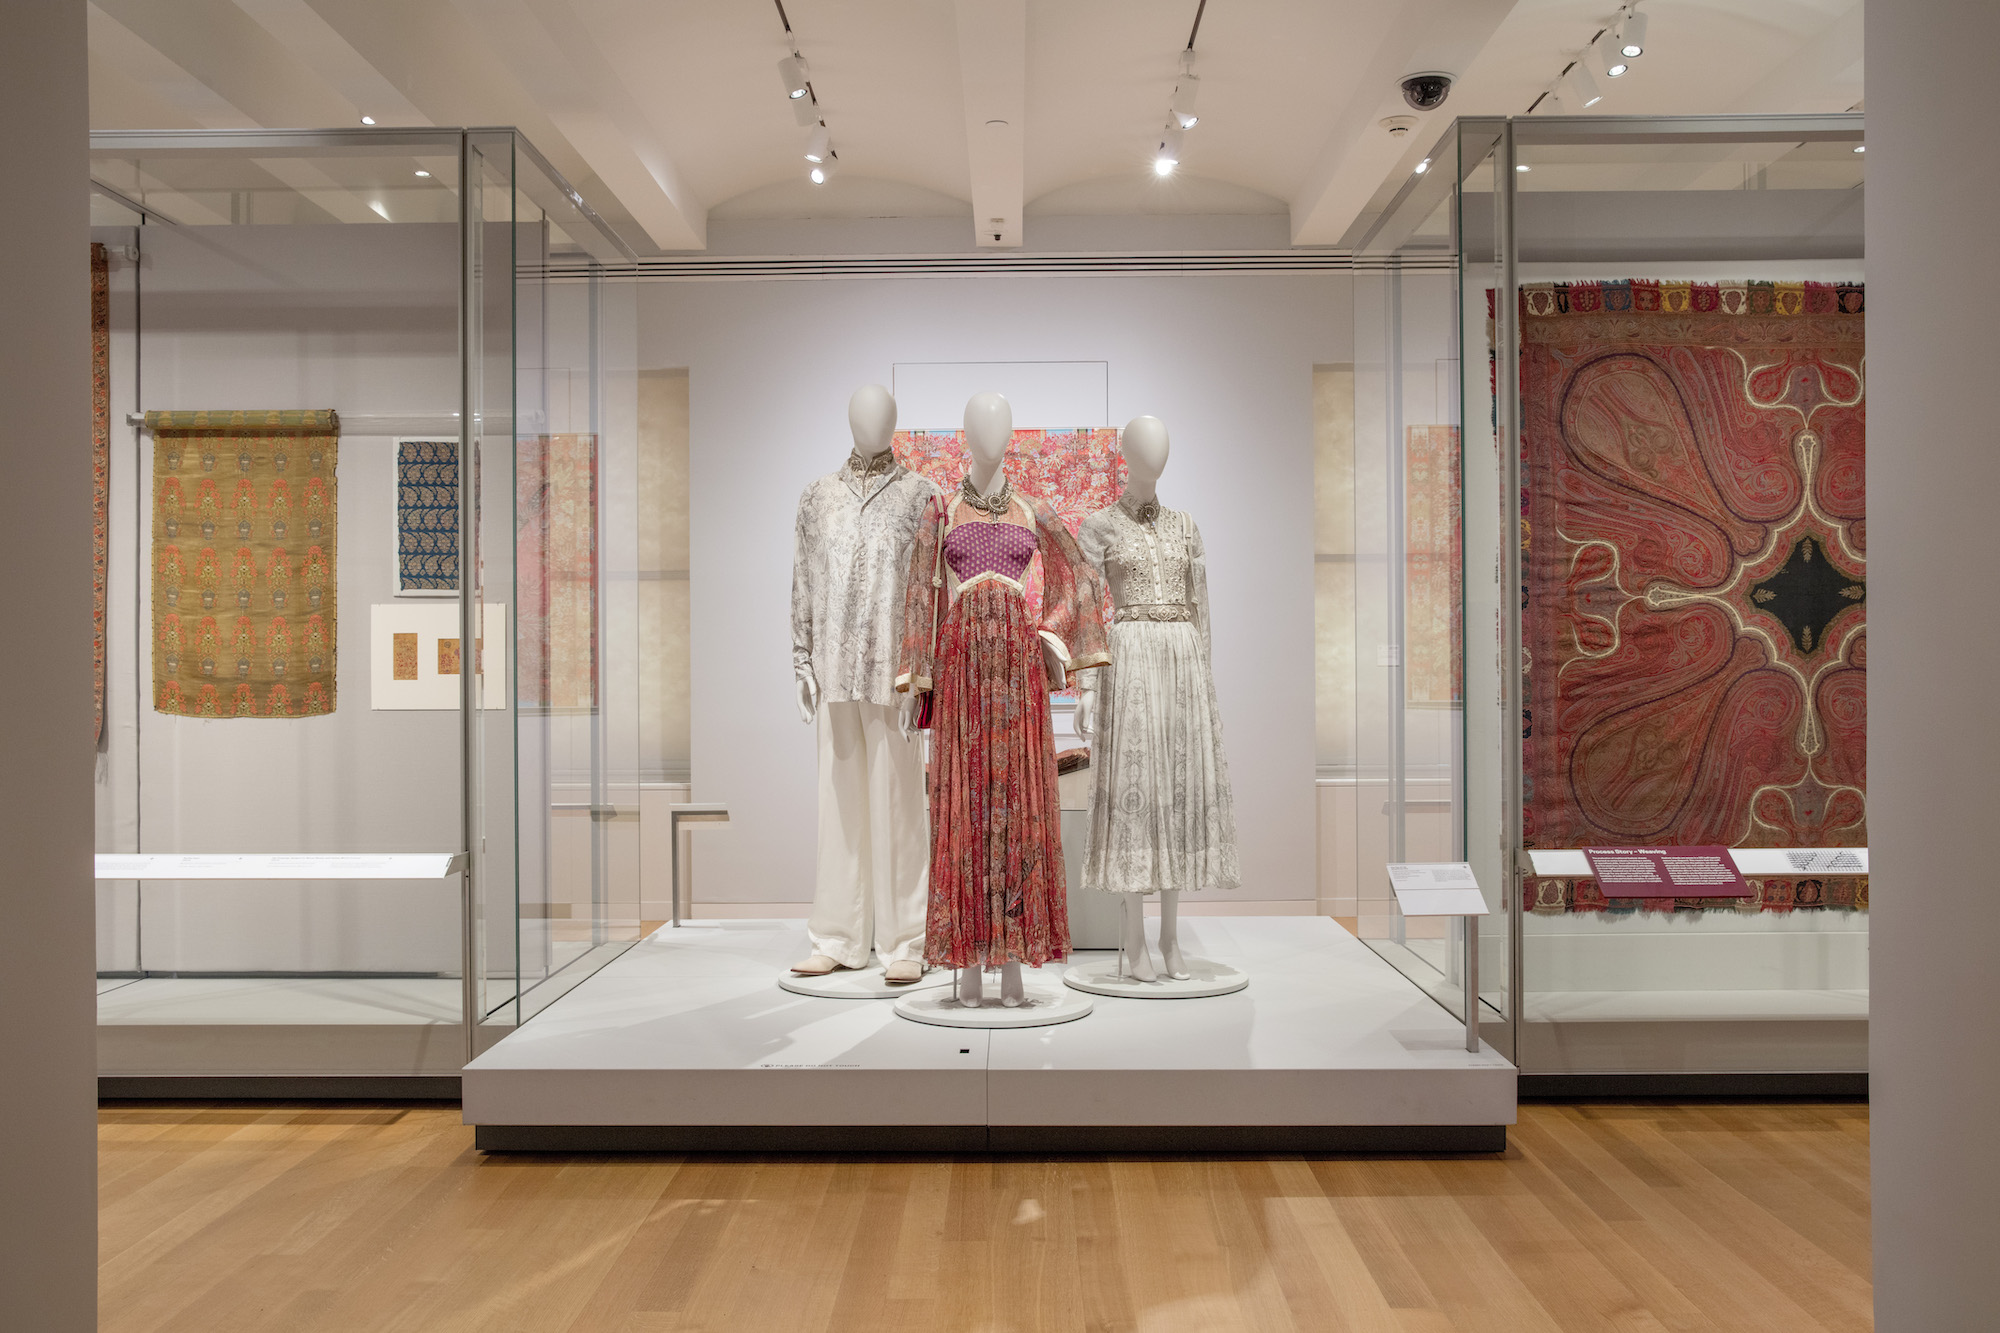 Three manikins stand in the middle of a gallery, wearing red and white clothing with paisley patterns. Displayed on both sides of the manikins are large textiles with paisley motifs.